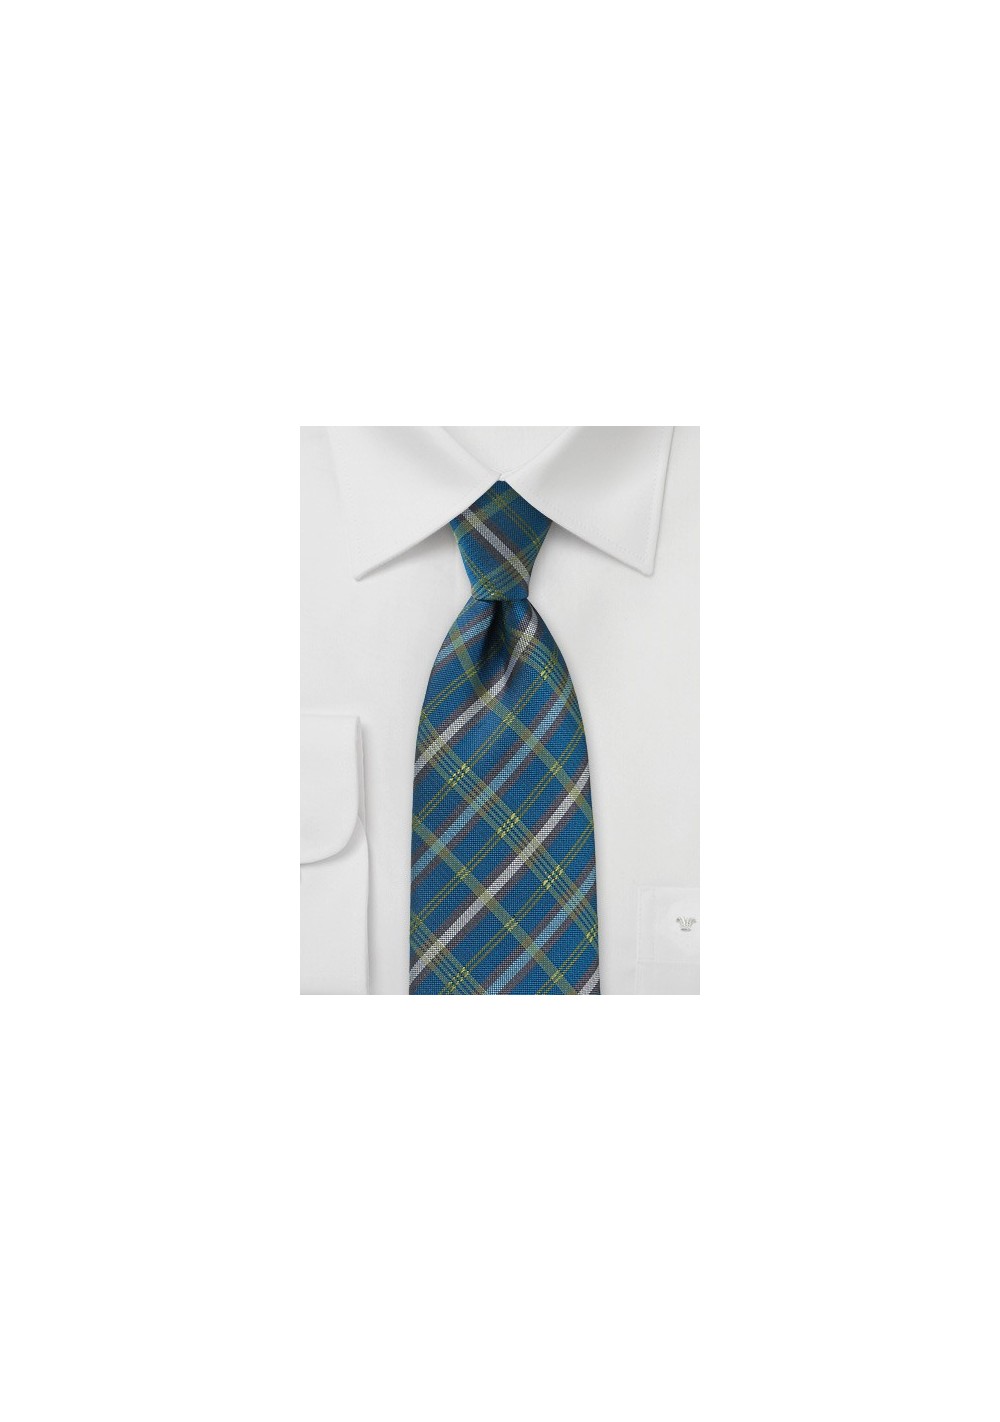 Men's Plaid Tie in Peacock and Browns